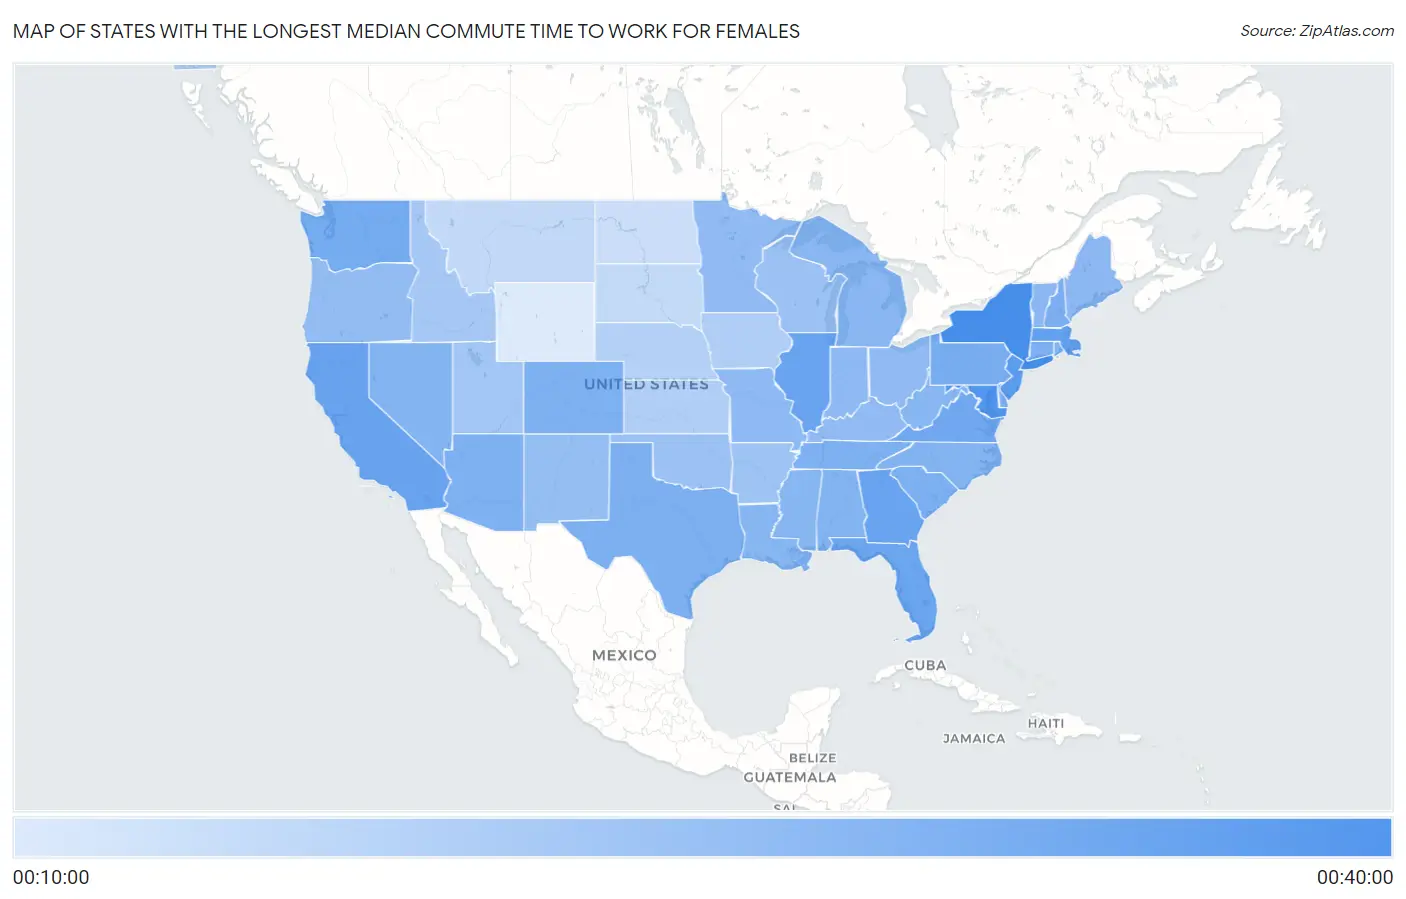 States with the Longest Median Commute Time to Work for Females in the United States Map